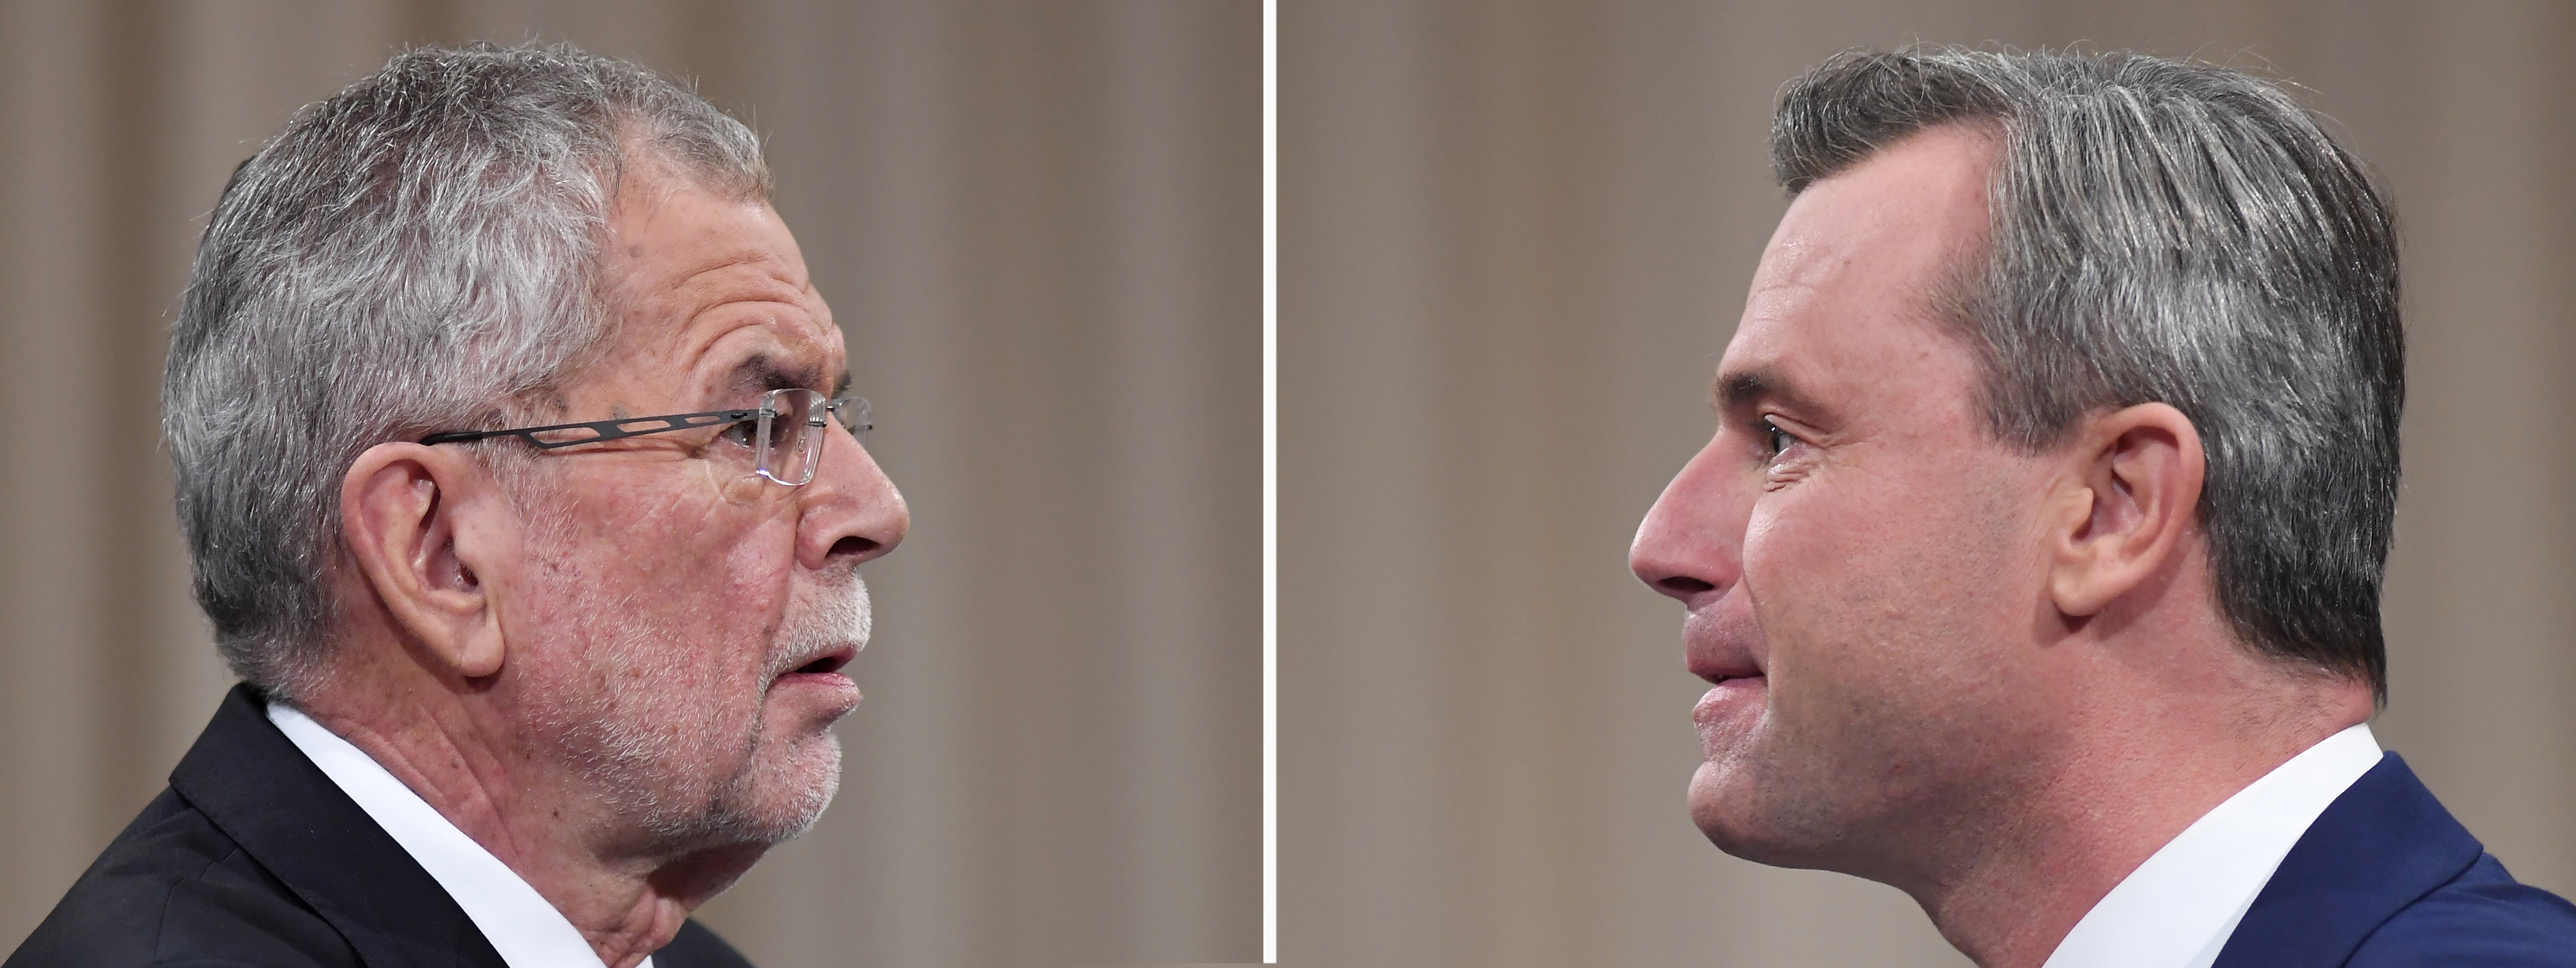 This combo of 2 photos shows Alexander Van der Bellen (L) candidate for presidential elections of the Austrian Greens and Norbert Hofer (R), candidate of Austria's right-wing Freedom Party, FPOE, speaking to each other during a television debate in Vienna, Austria on November 27, 2016. / AFP PHOTO / JOE KLAMAR